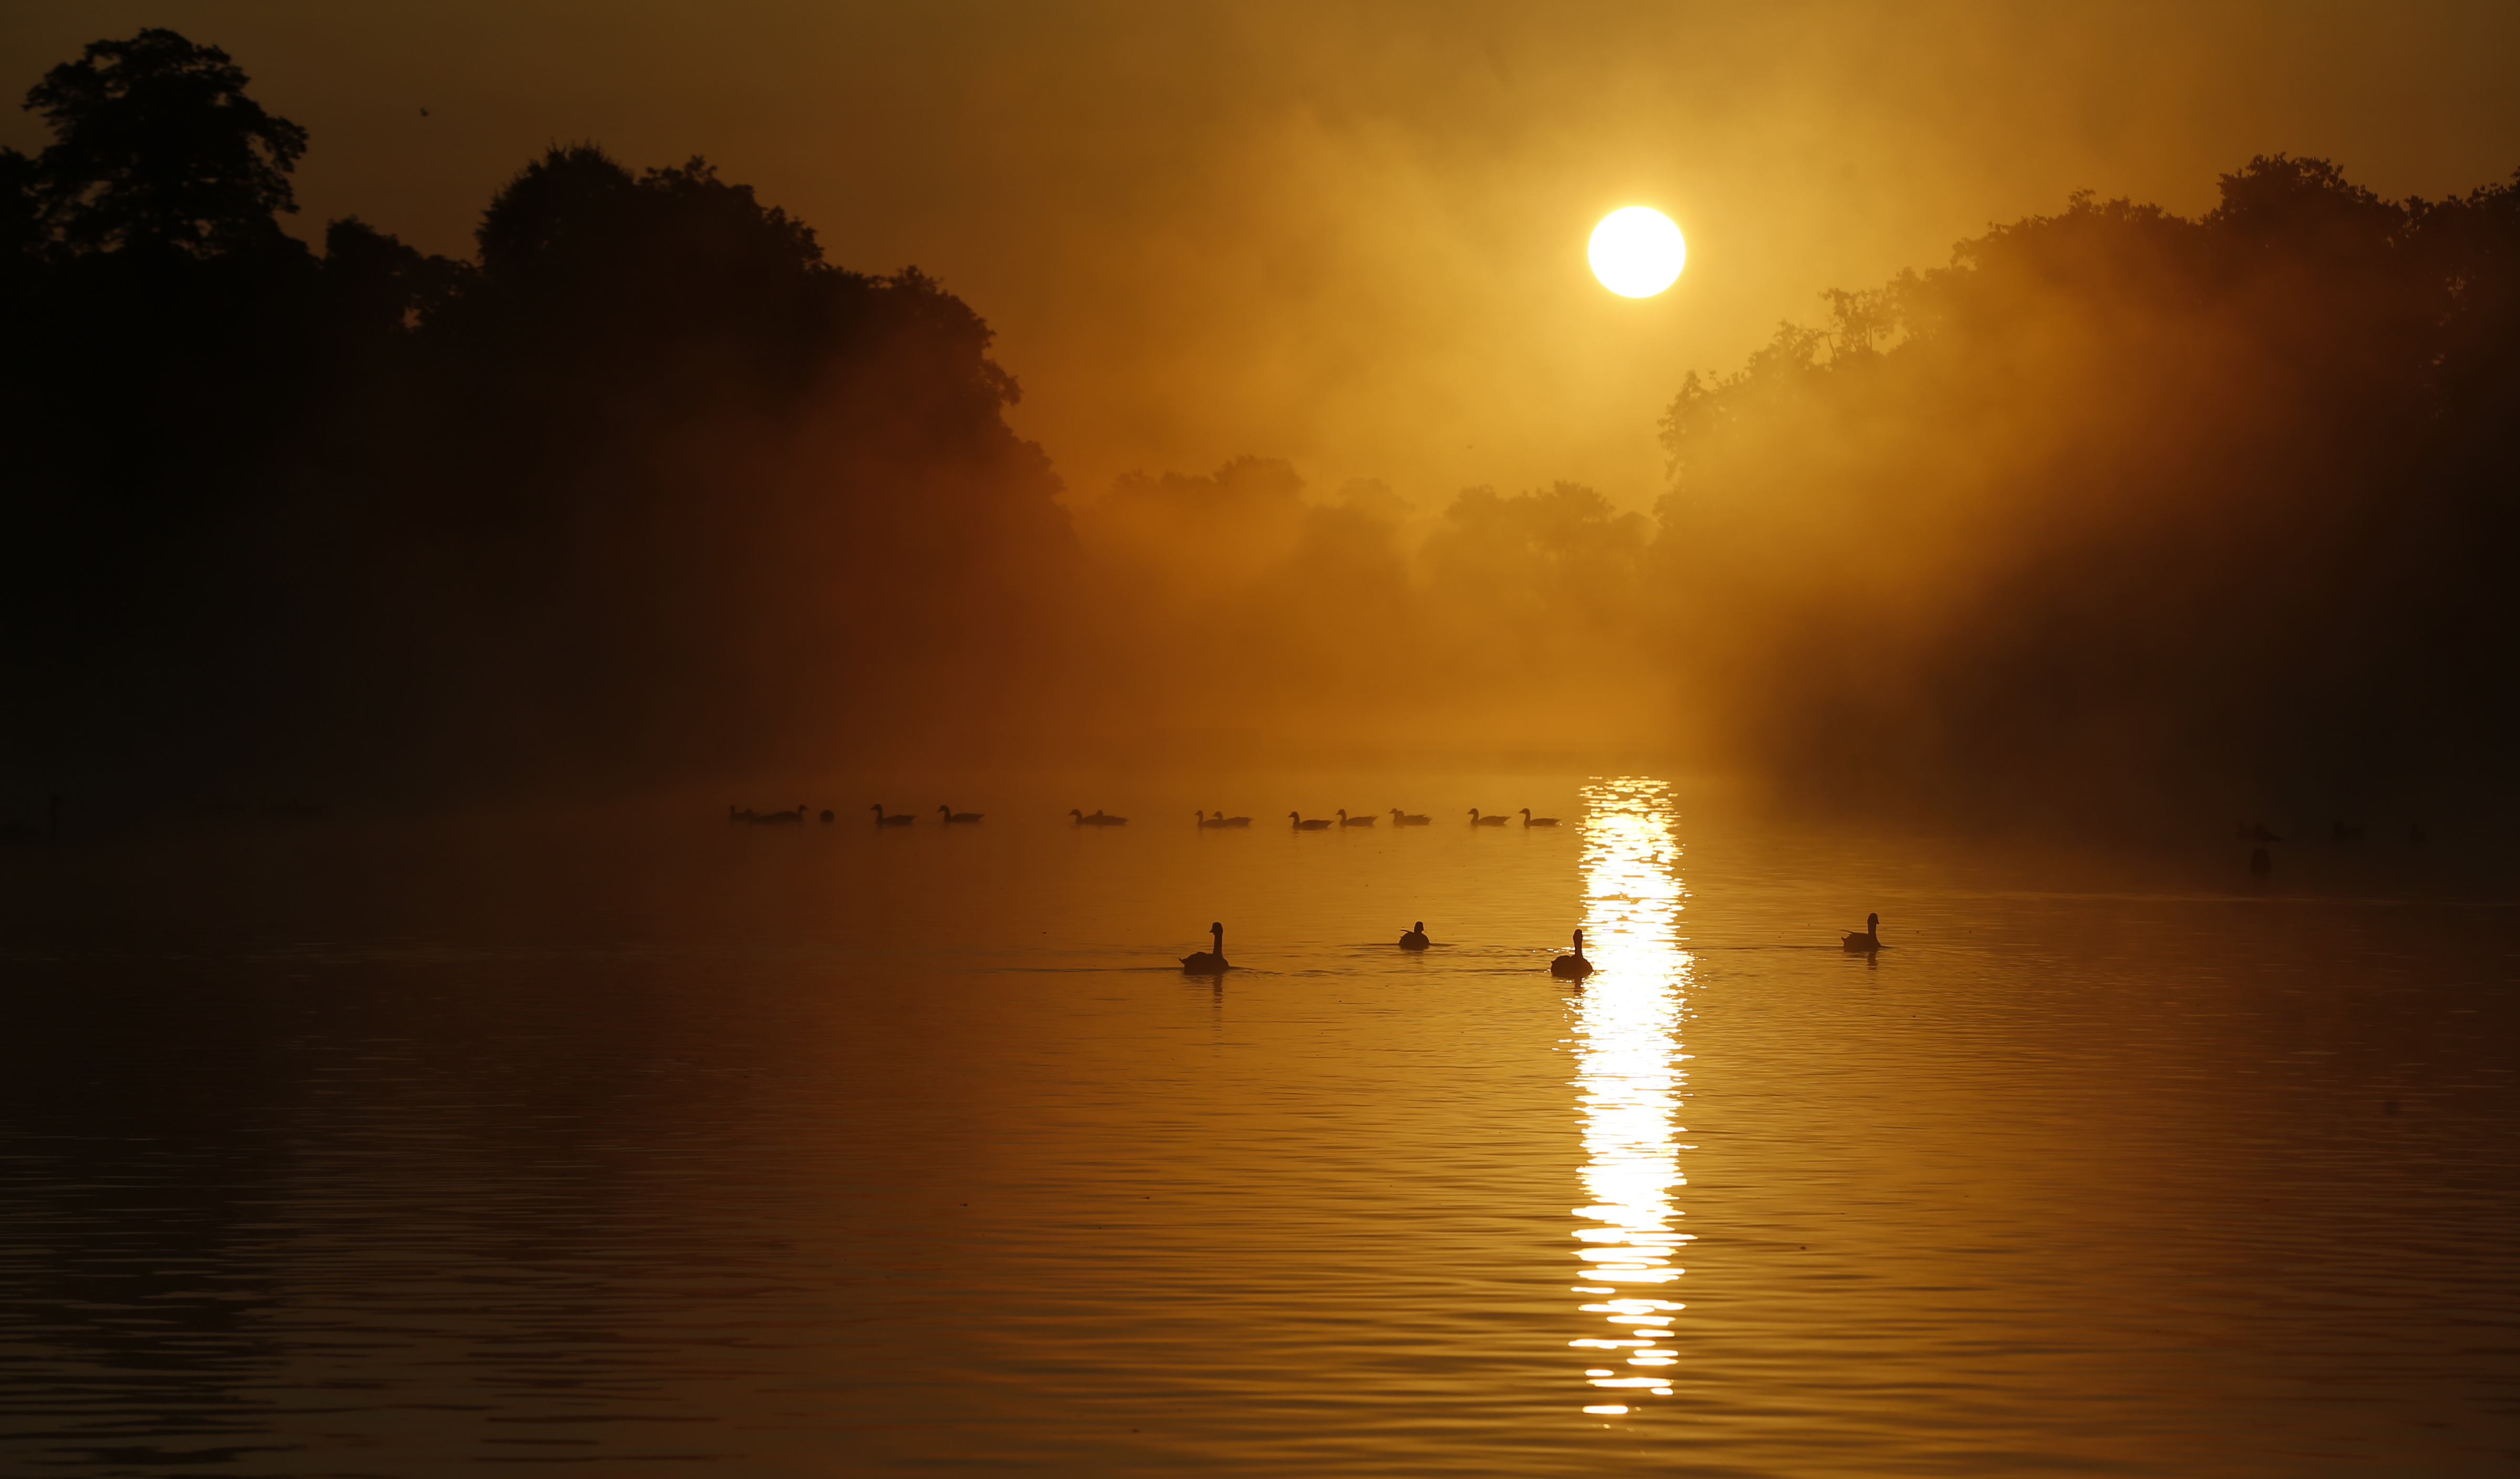 Mute swans and Canadian Geese glide on the mist shrouded Round Pond near Kensington Palace, just after sunrise in London, Thursday, Aug. 31, 2017. (AP Photo/Alastair Grant)